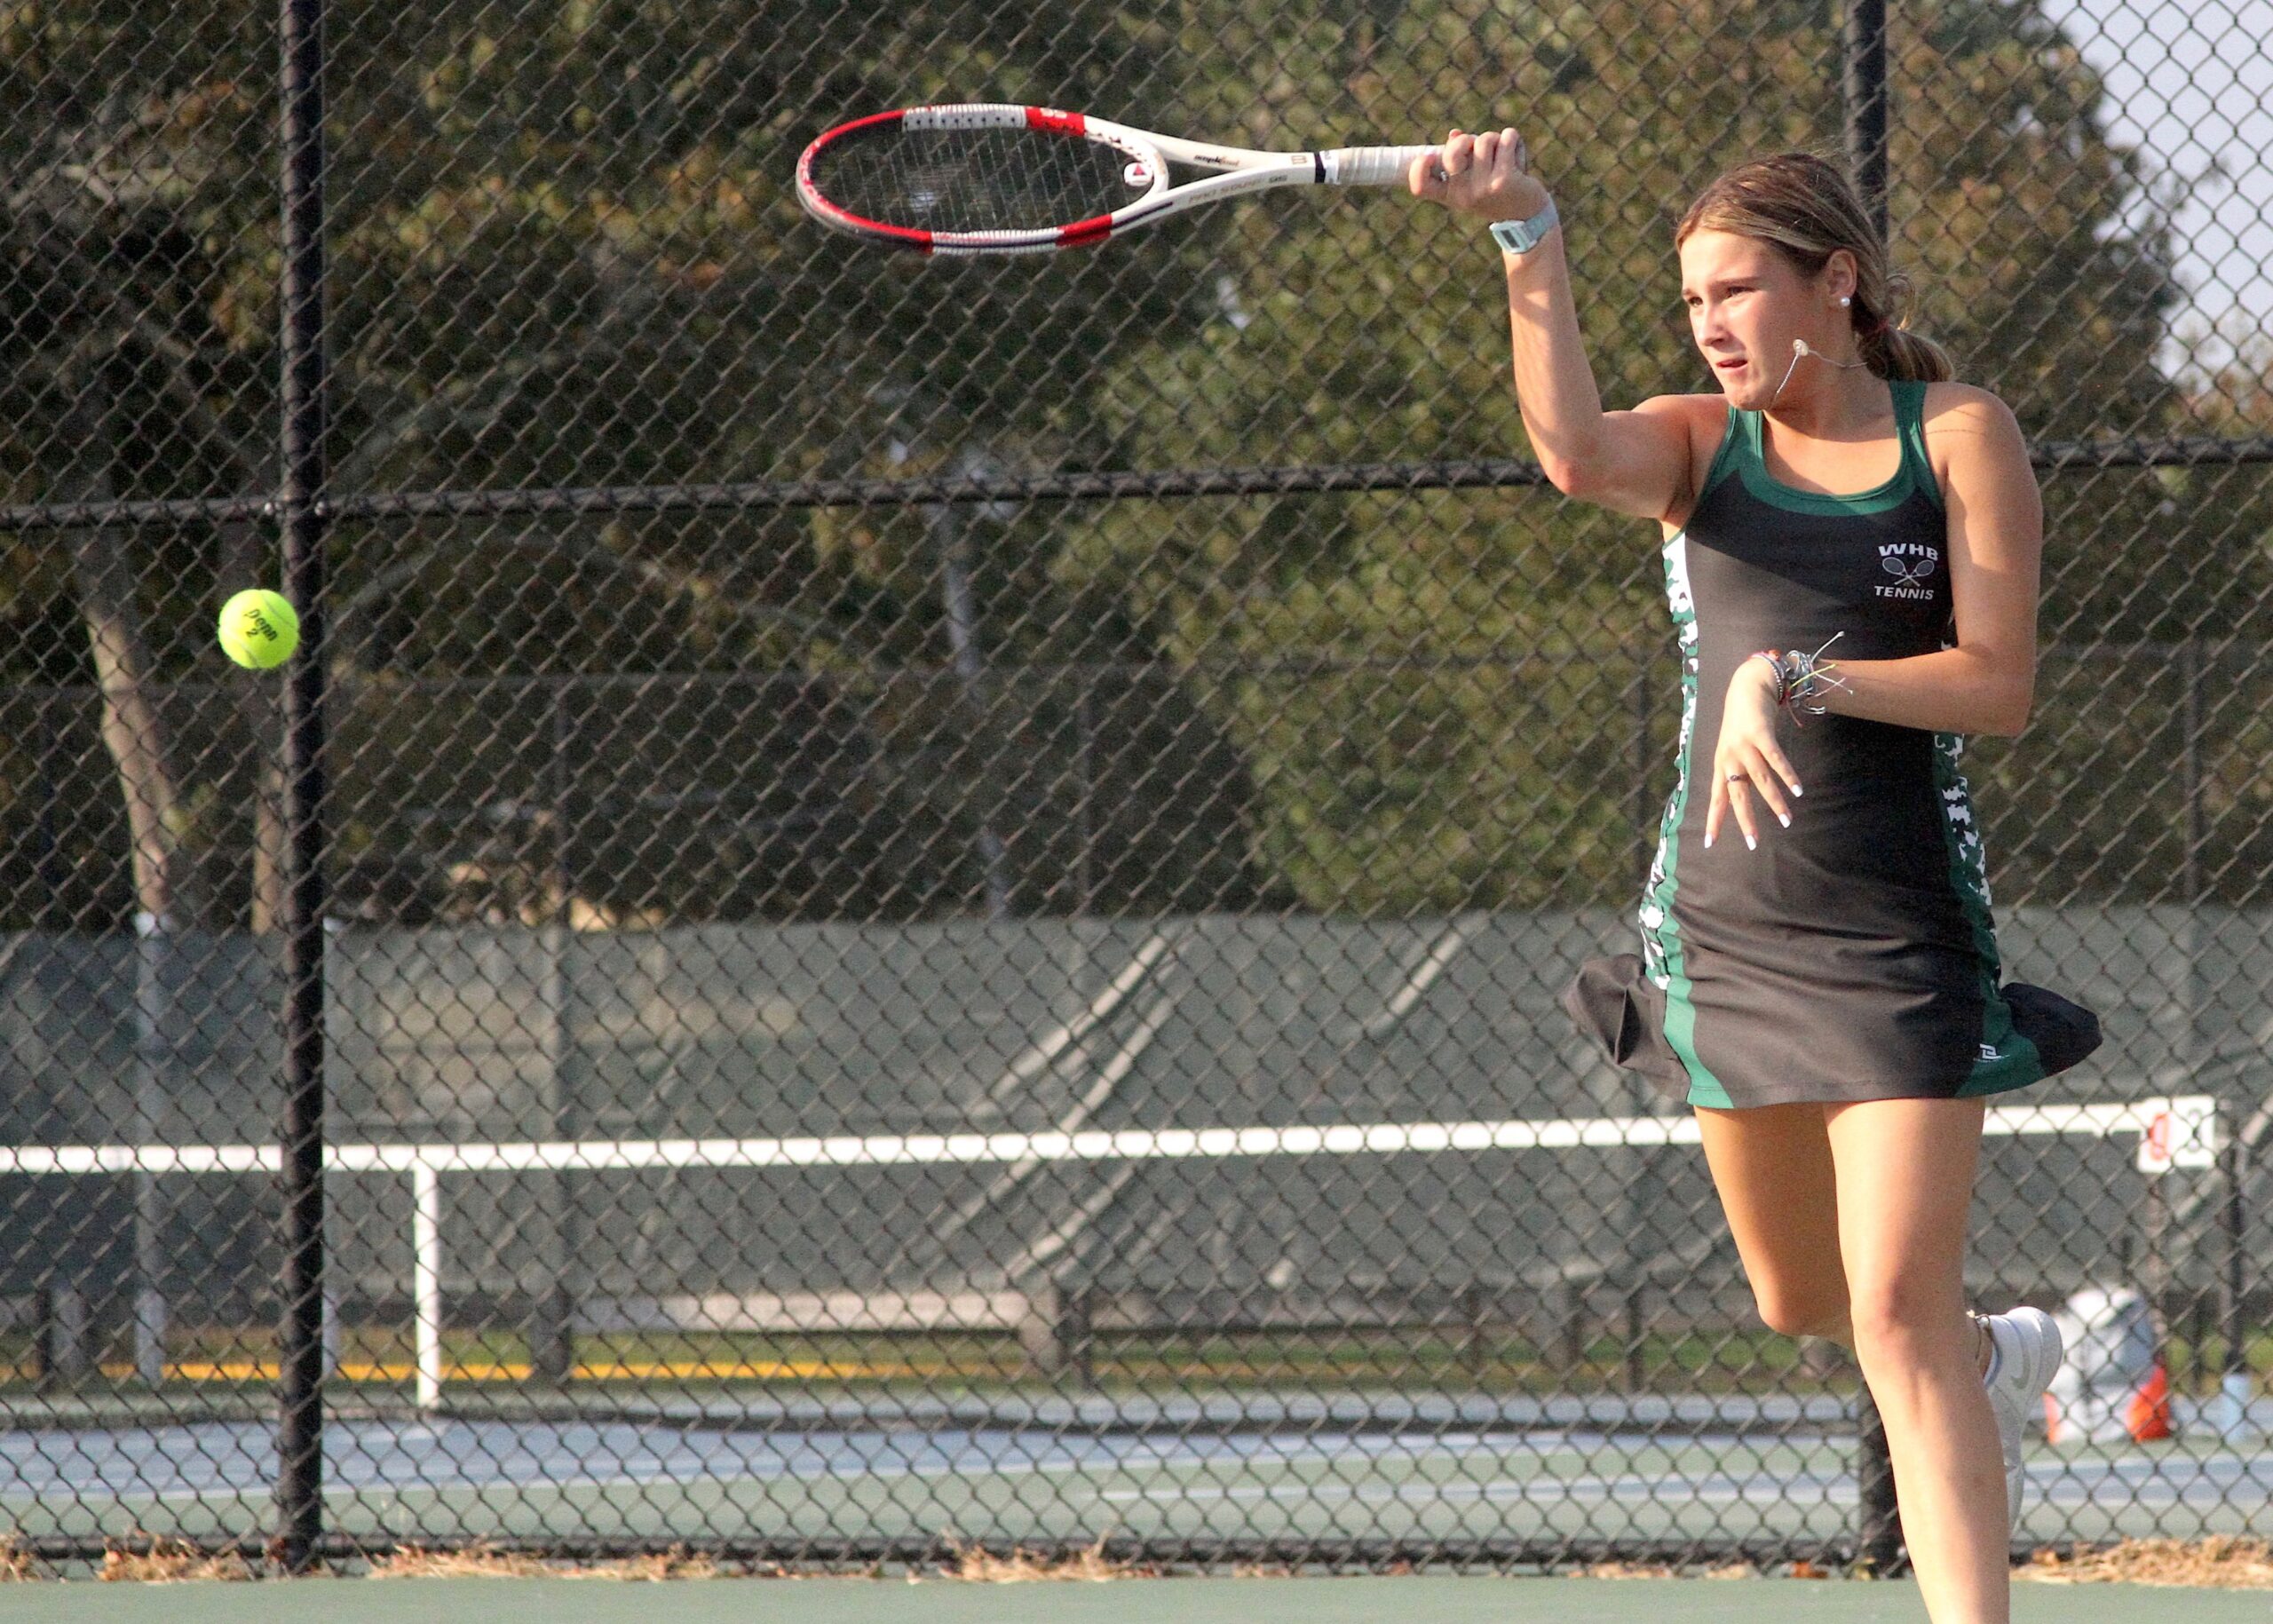 Westhampton Beach's Shannon Killoran keeps the rally going at first doubles. DESIRÉE KEEGAN